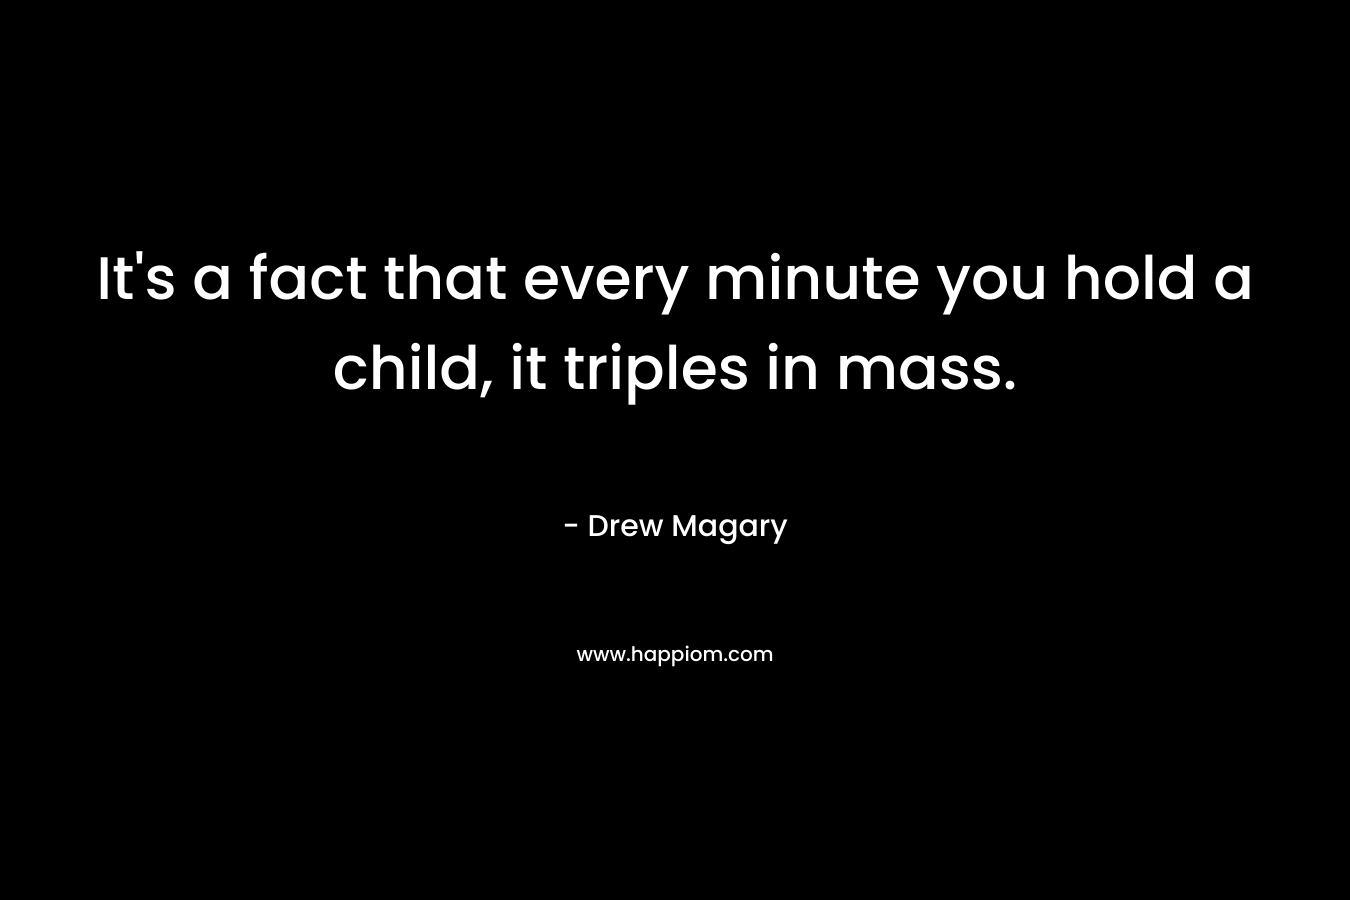 It's a fact that every minute you hold a child, it triples in mass.